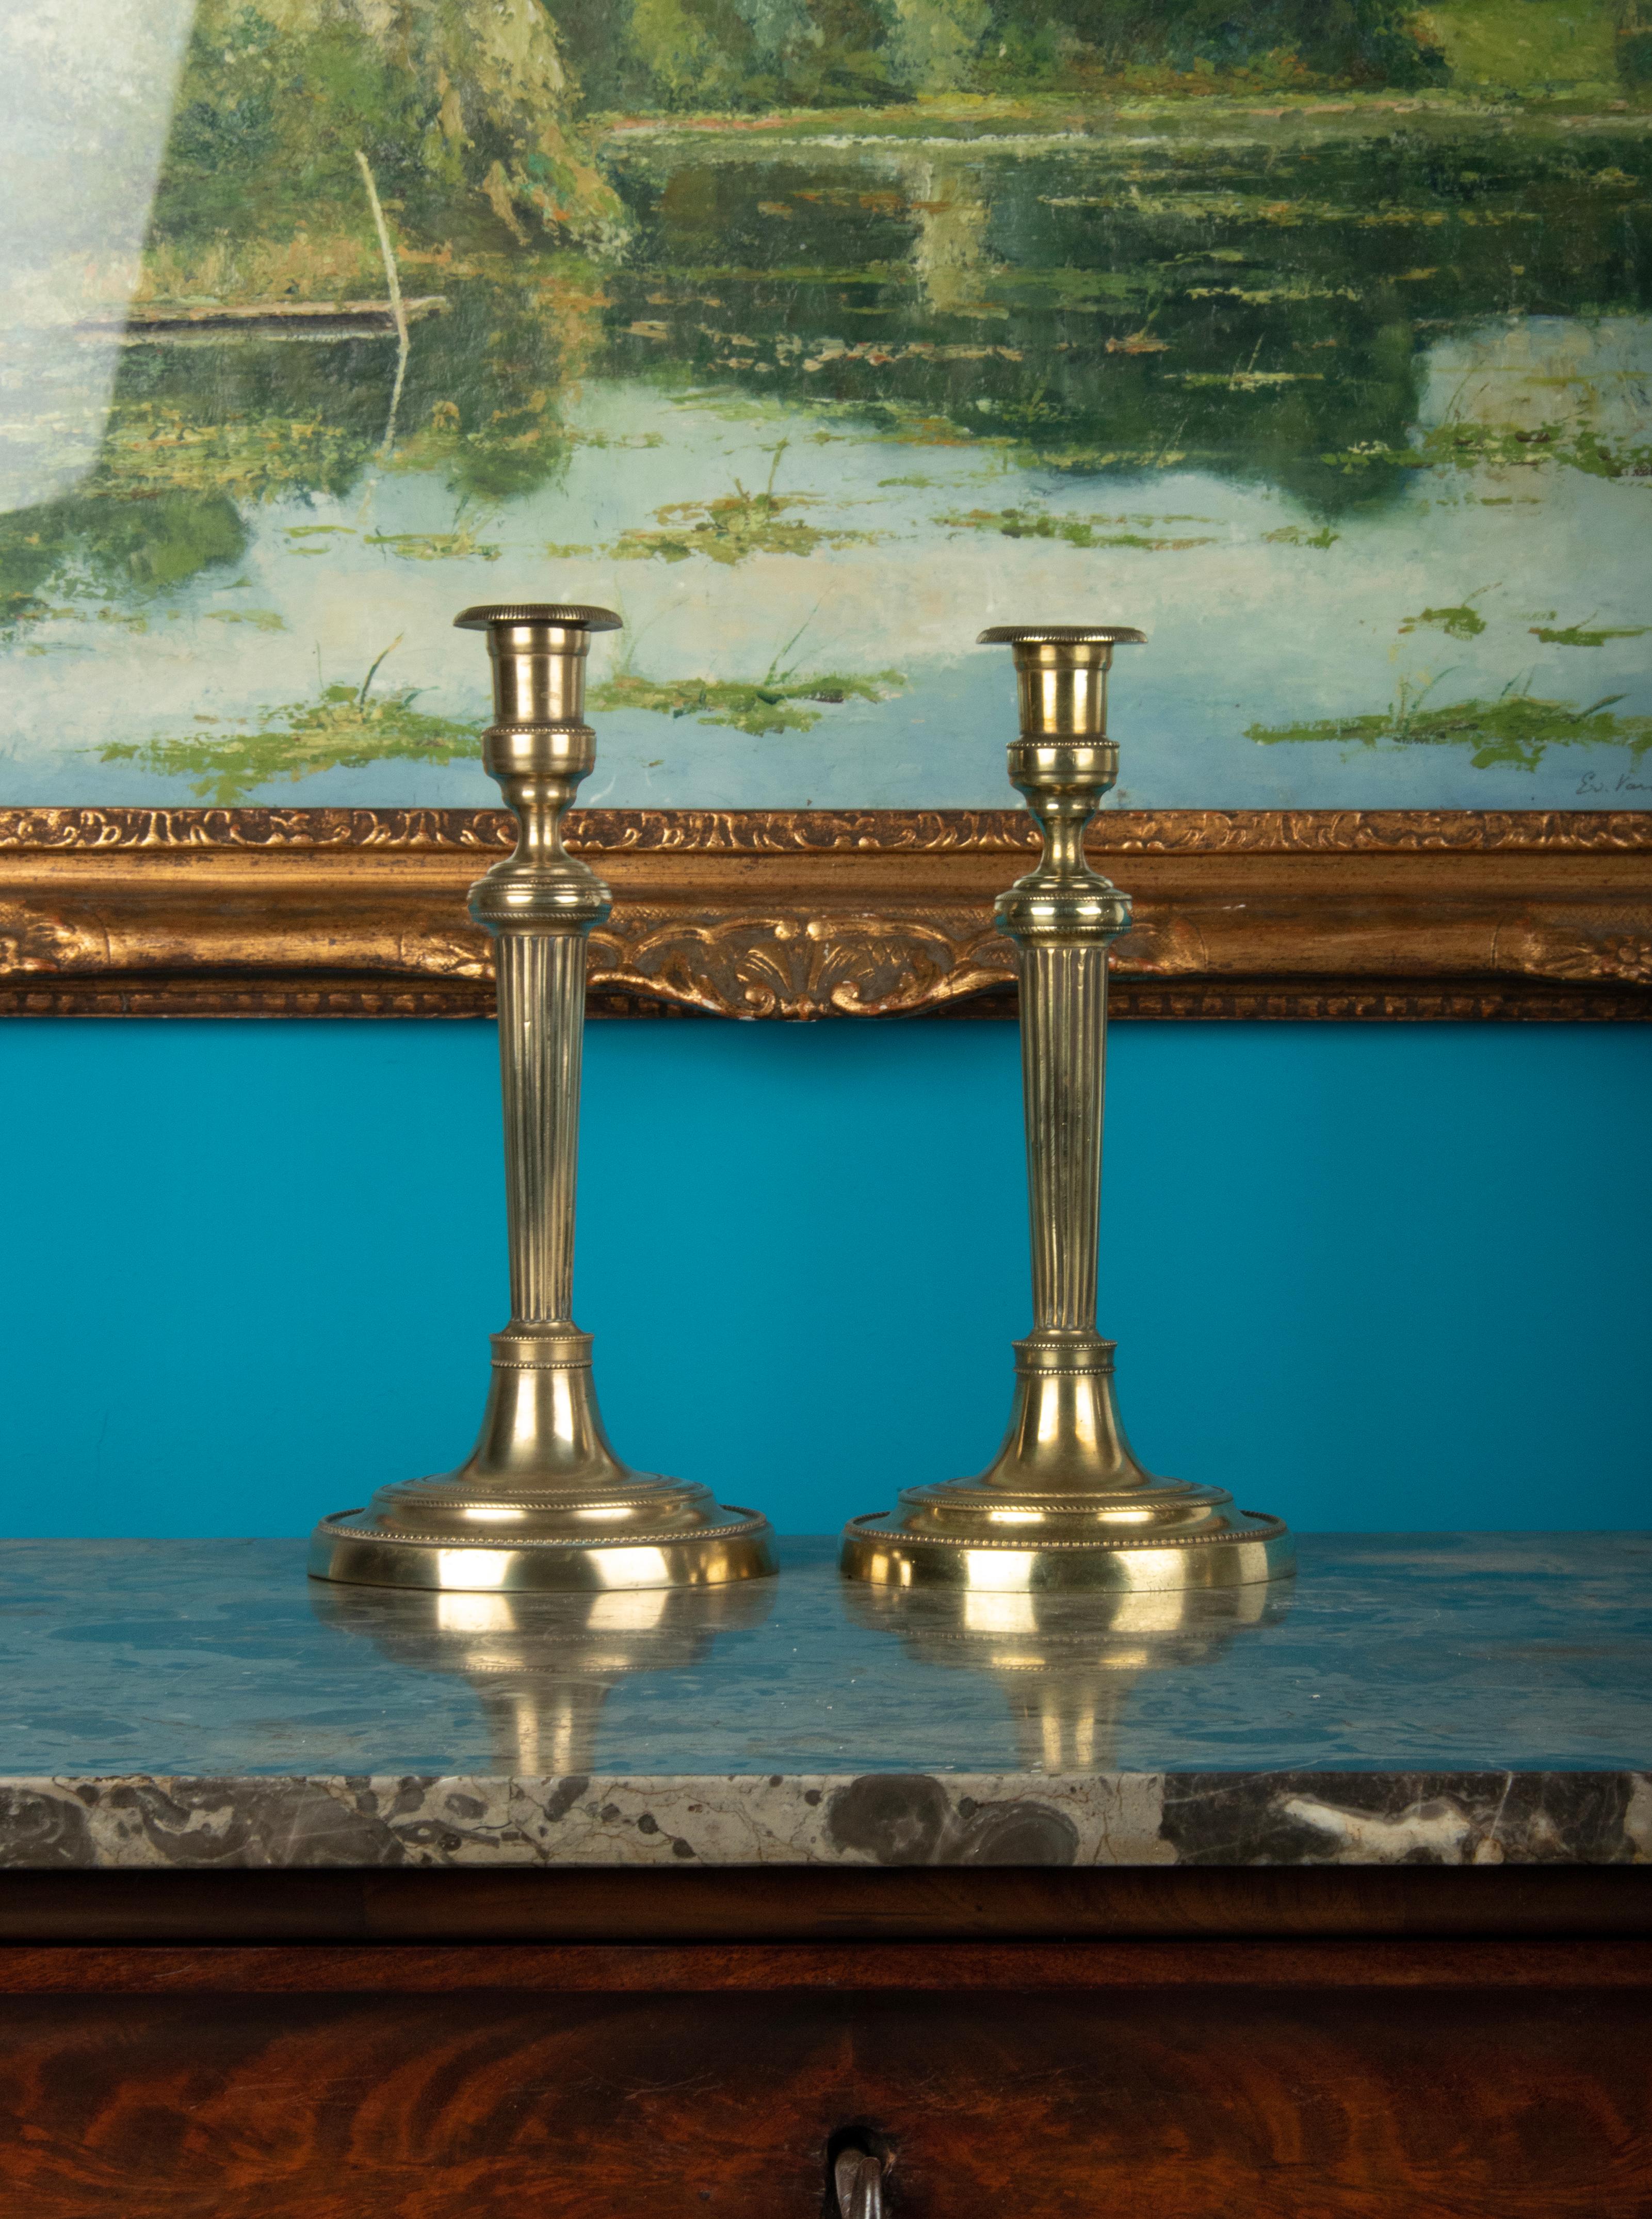 A pair of brass candlesticks. Beautifully decorated with pearl edges and fluted stem. Louis XVI style. The candlesticks date from around 1880-1890, originating from France.